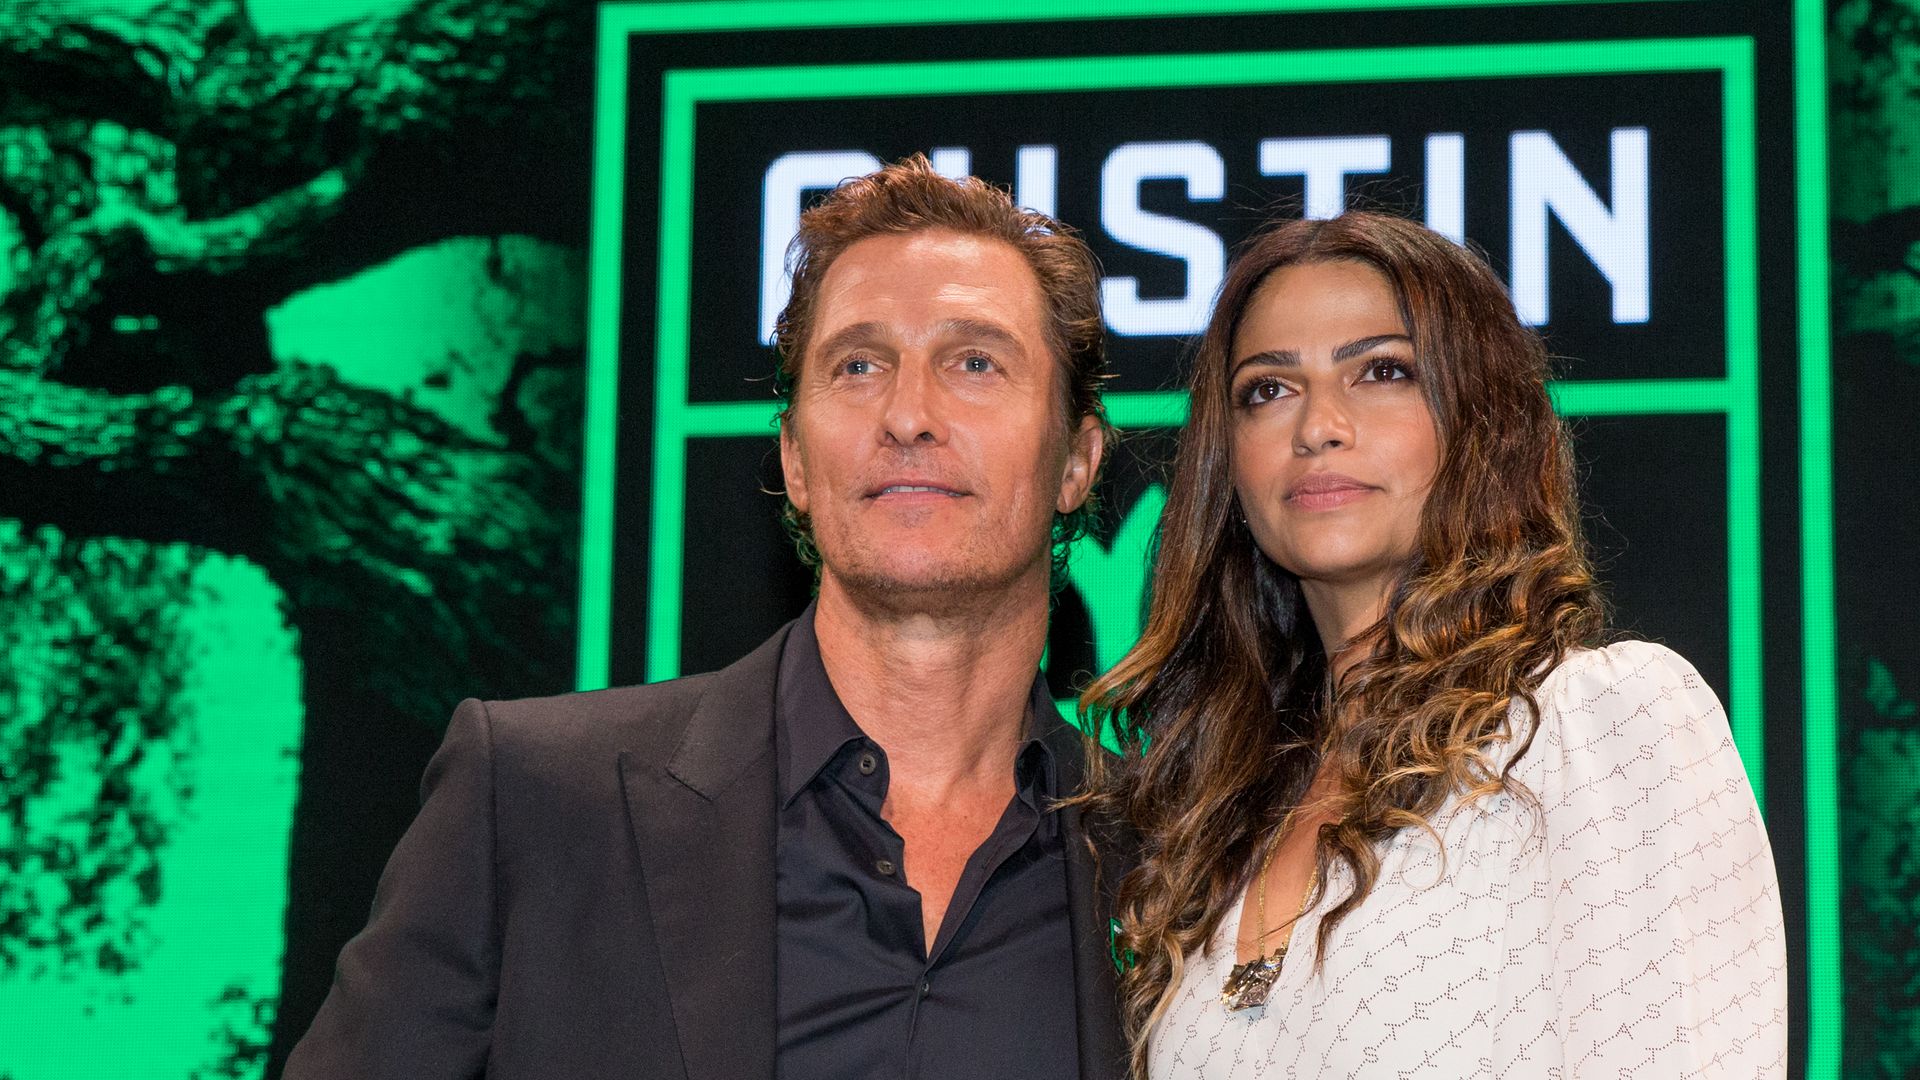 Matthew McConaughey and Camila Alves attend the Austin FC Major League Soccer club announcement of four new investors including Matthew McConaughey, the 'Minister of Culture' at 3TEN ACL Live on August 23, 2019 in Austin, Texas